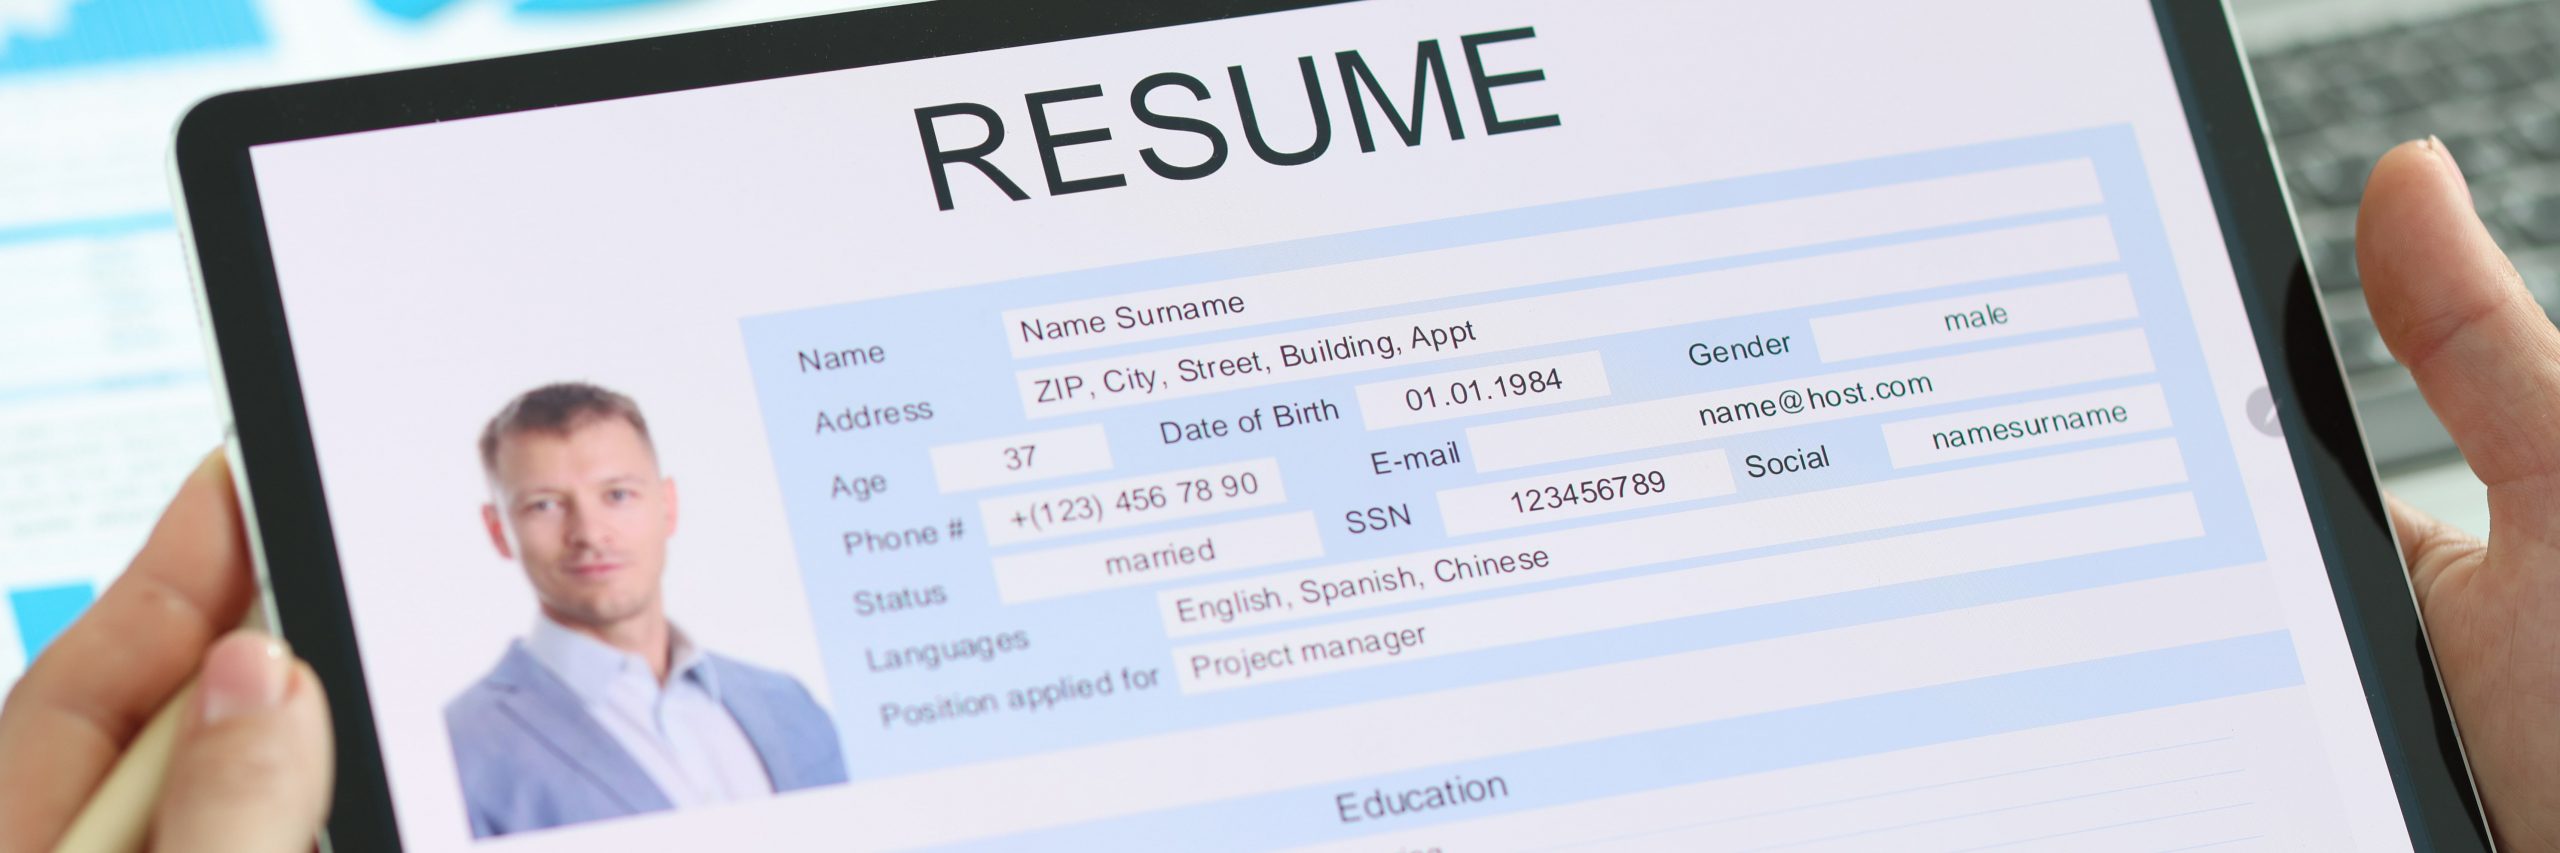 how to write an effective resume